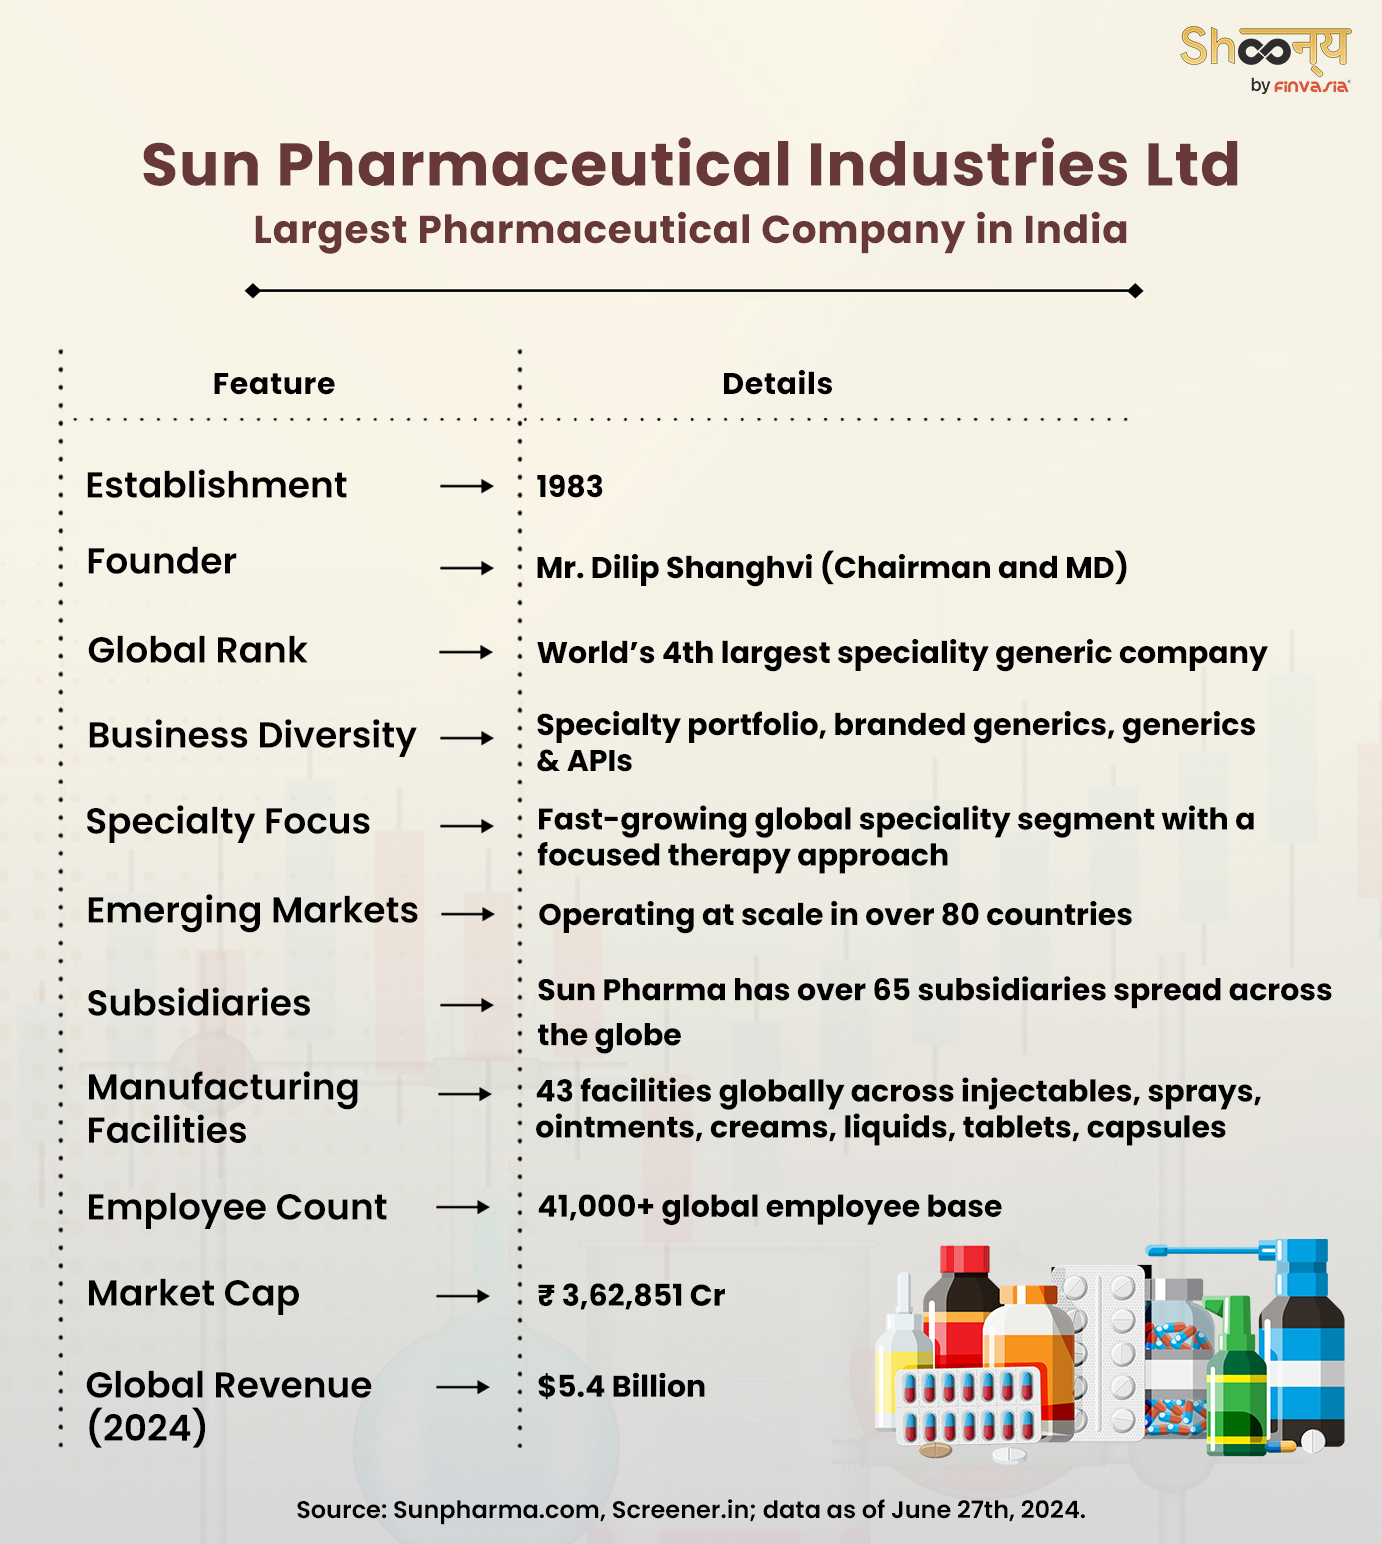 Sun Pharmaceutical Industries Ltd.-Largest Pharmaceutical Company in India